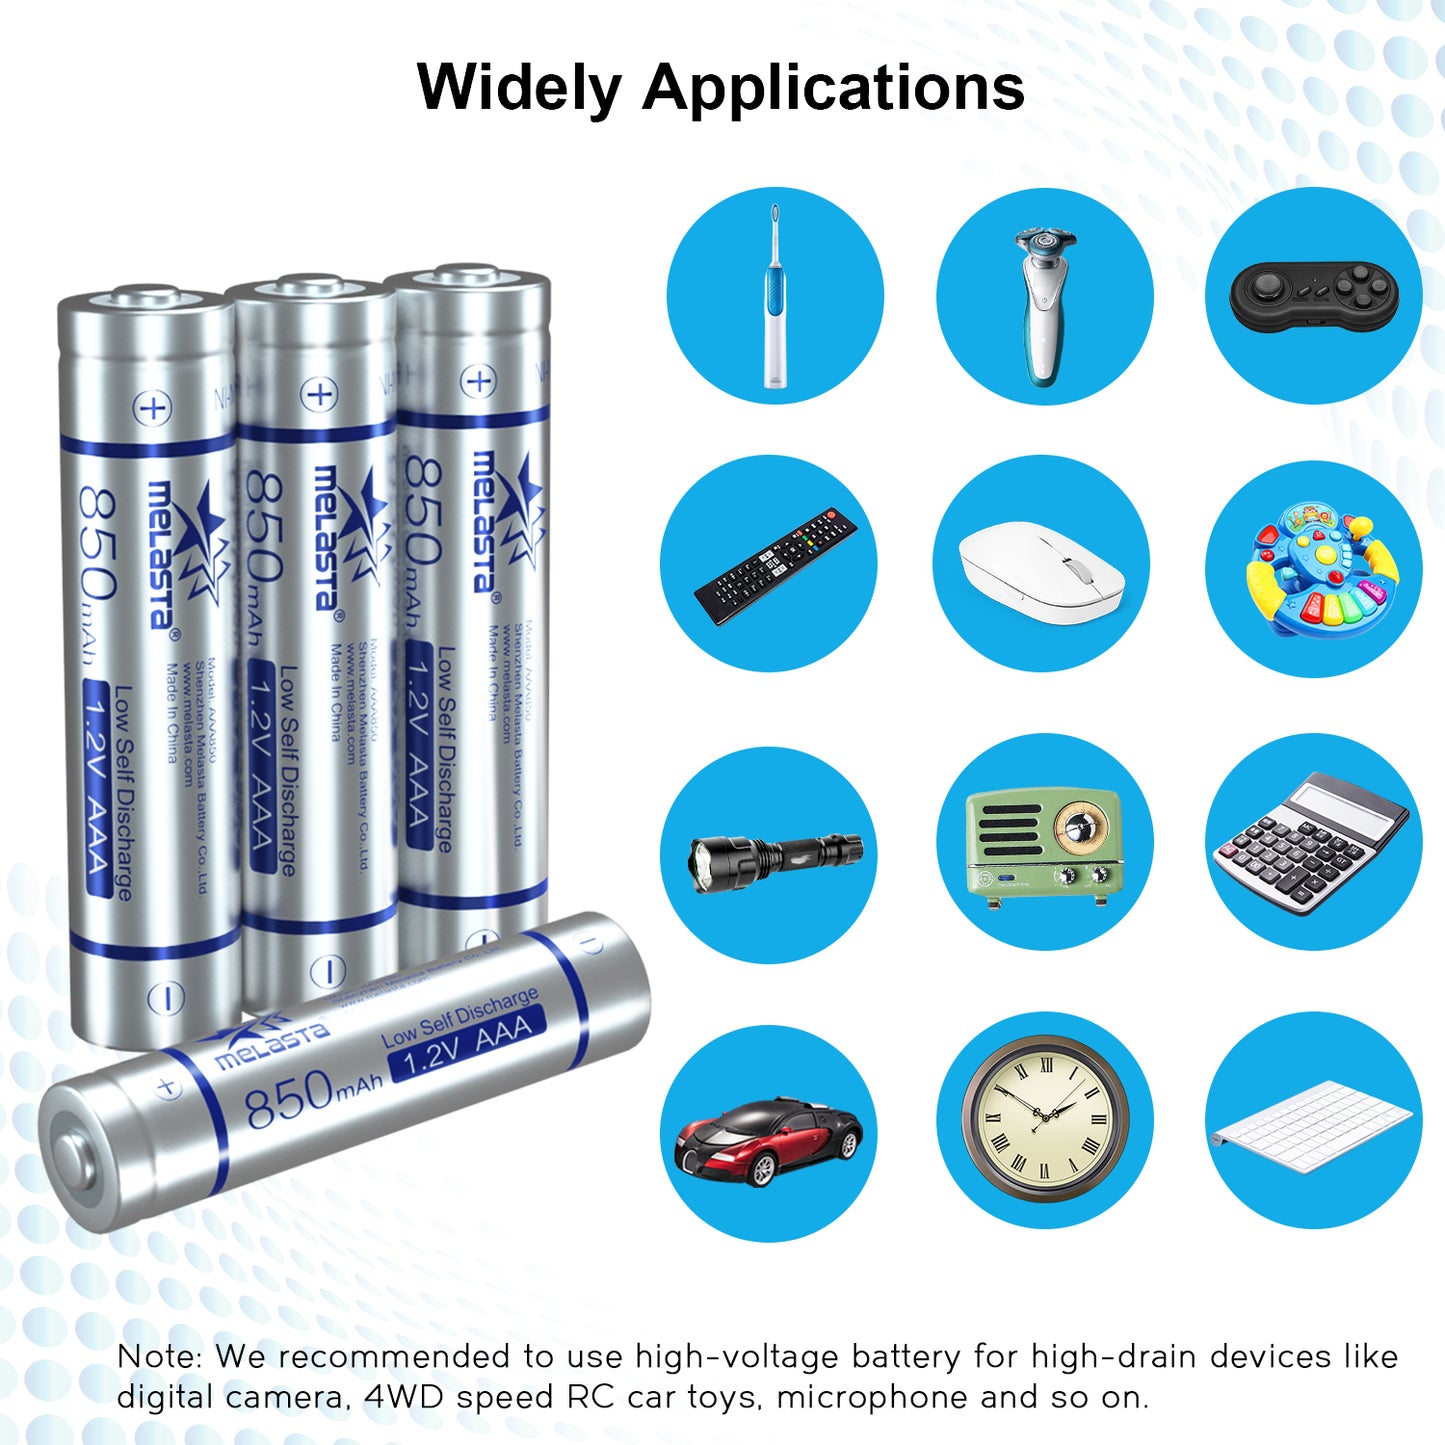 AAA LSD NIMH Rechargeable battery 1.2V 850mAh Low Self Discharge